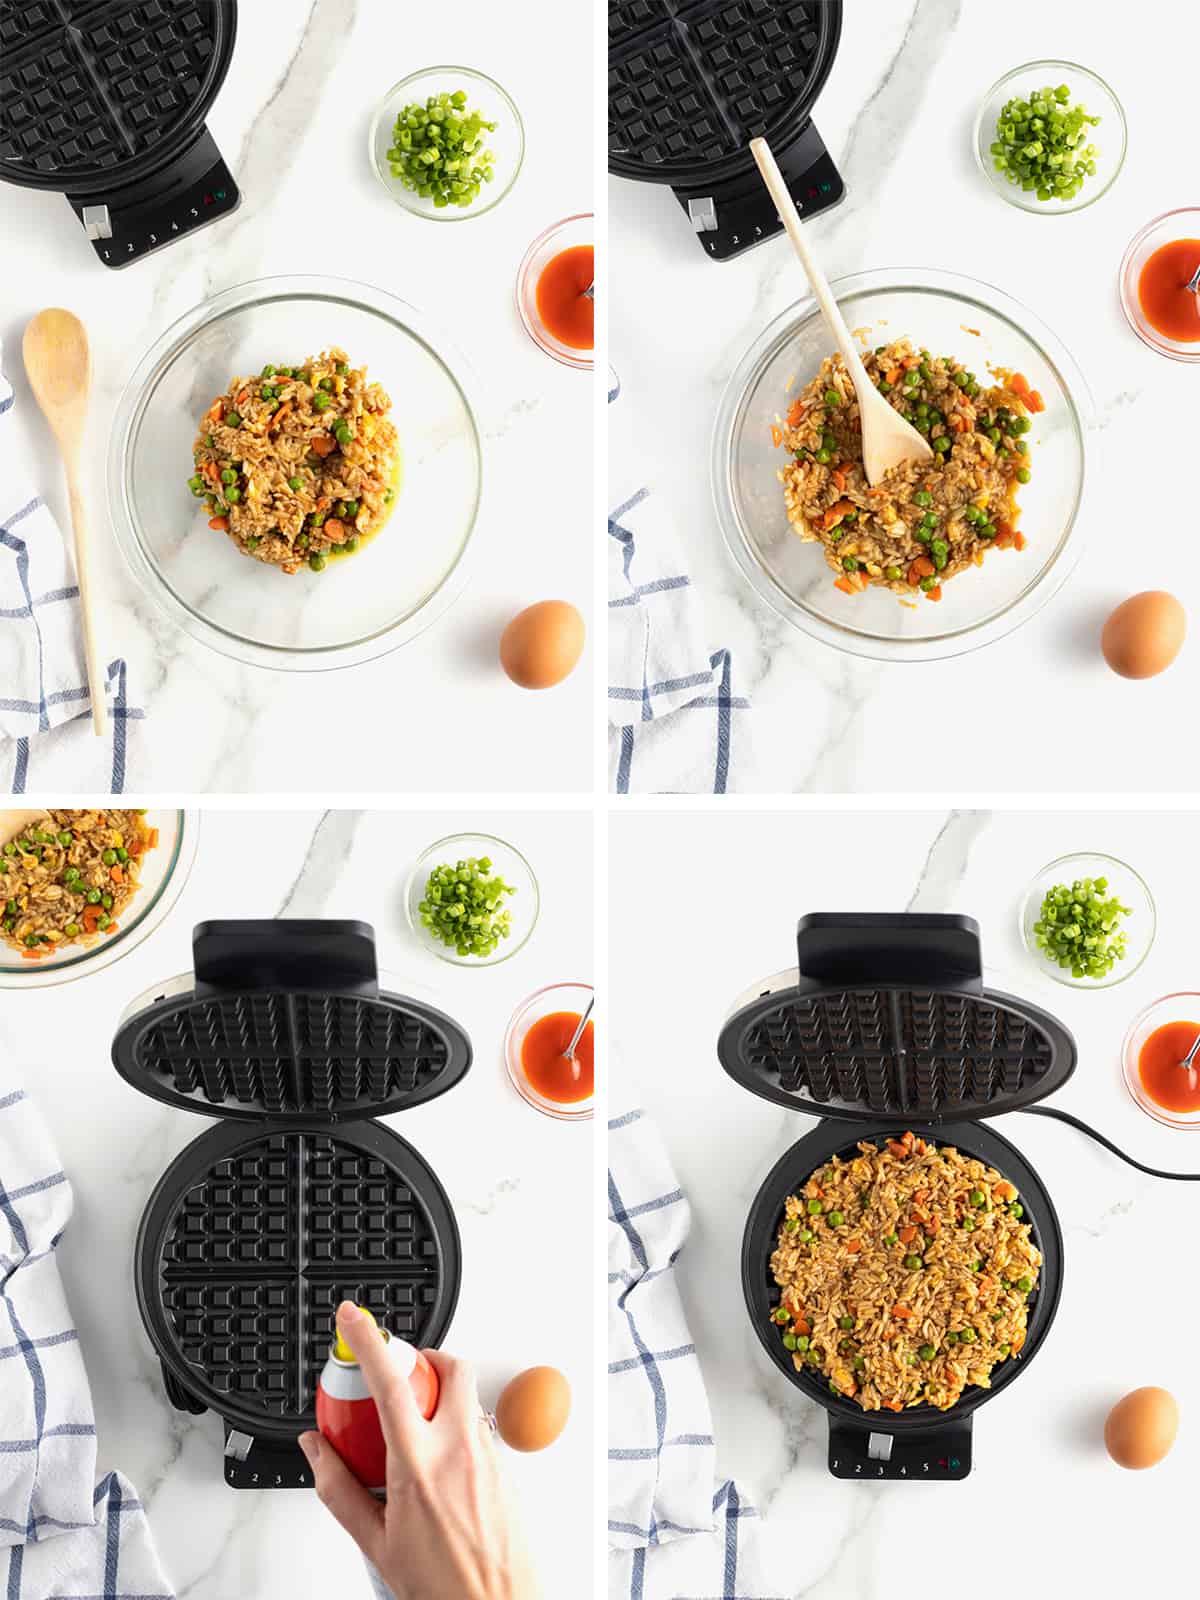 Steps to make a leftover fried rice waffle.